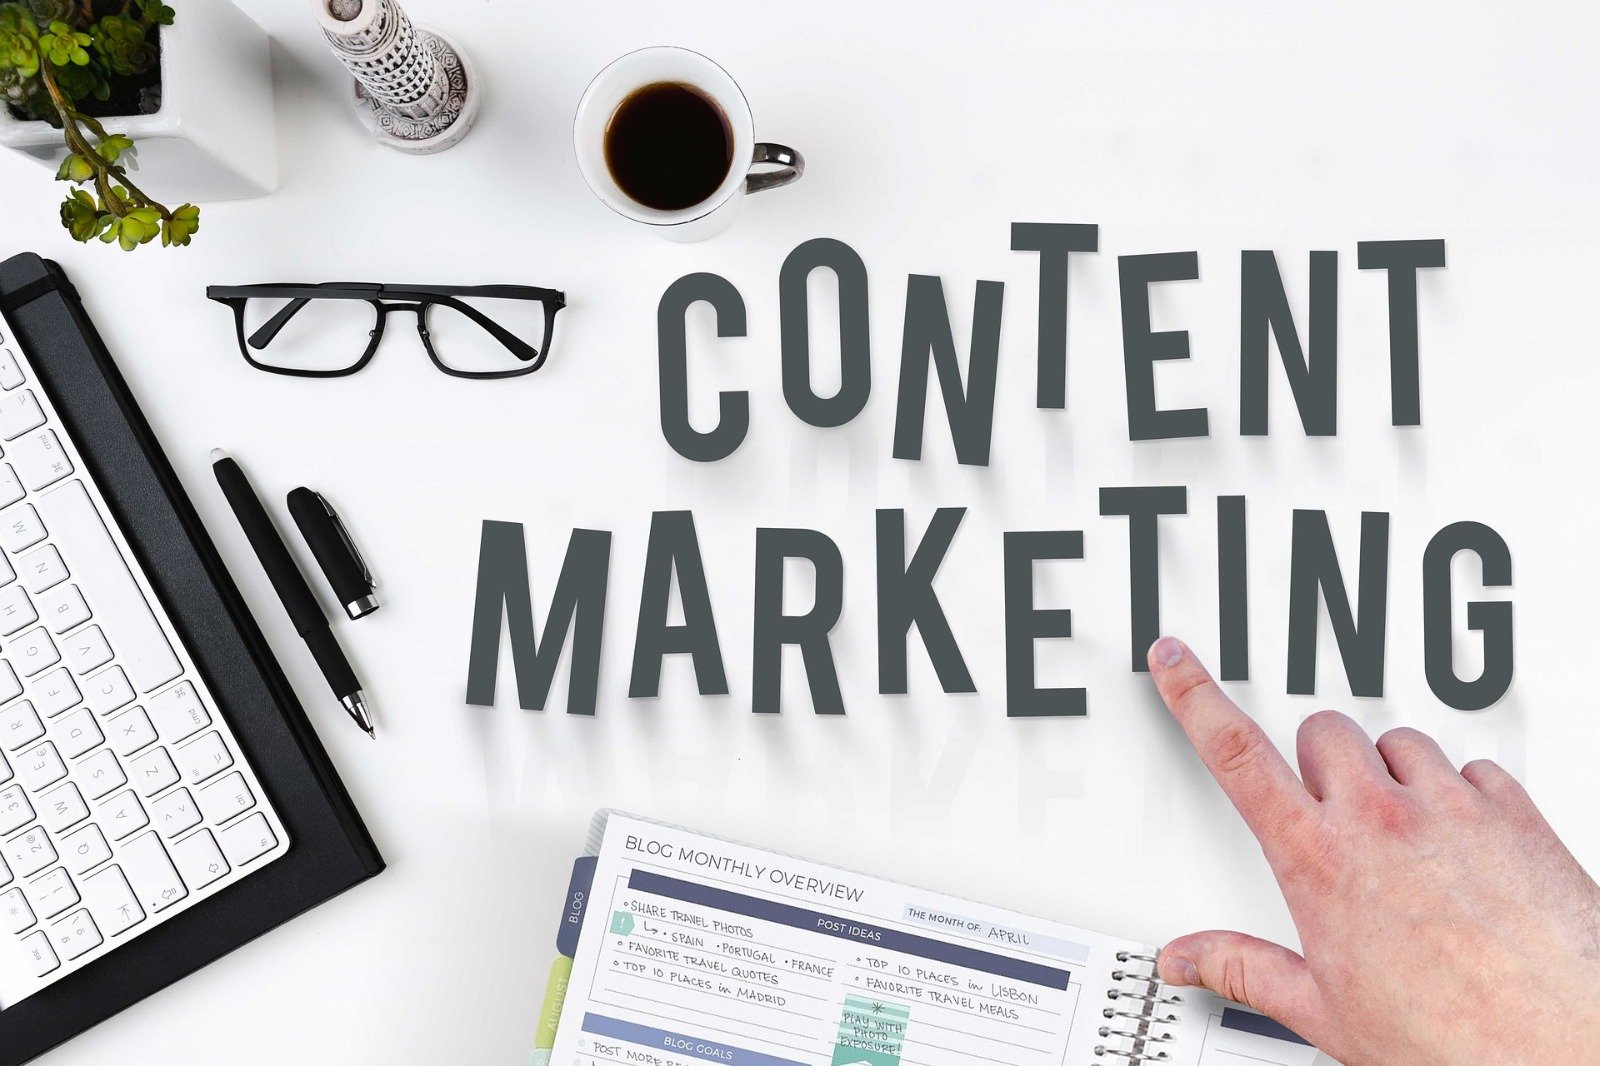 Content Marketing: The Endeavor of Authority Building